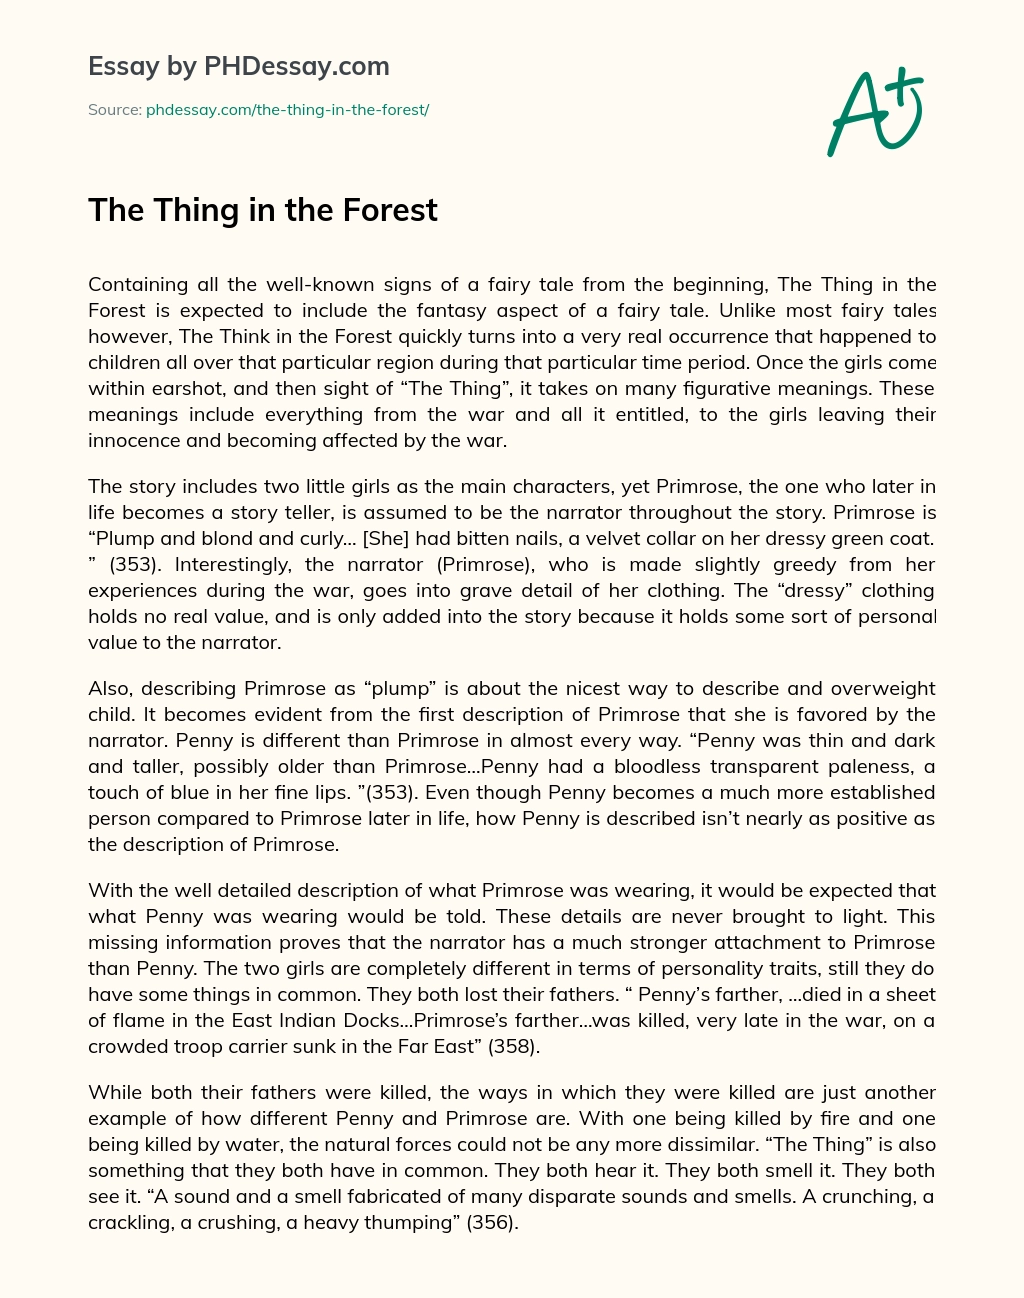 The Thing in the Forest essay